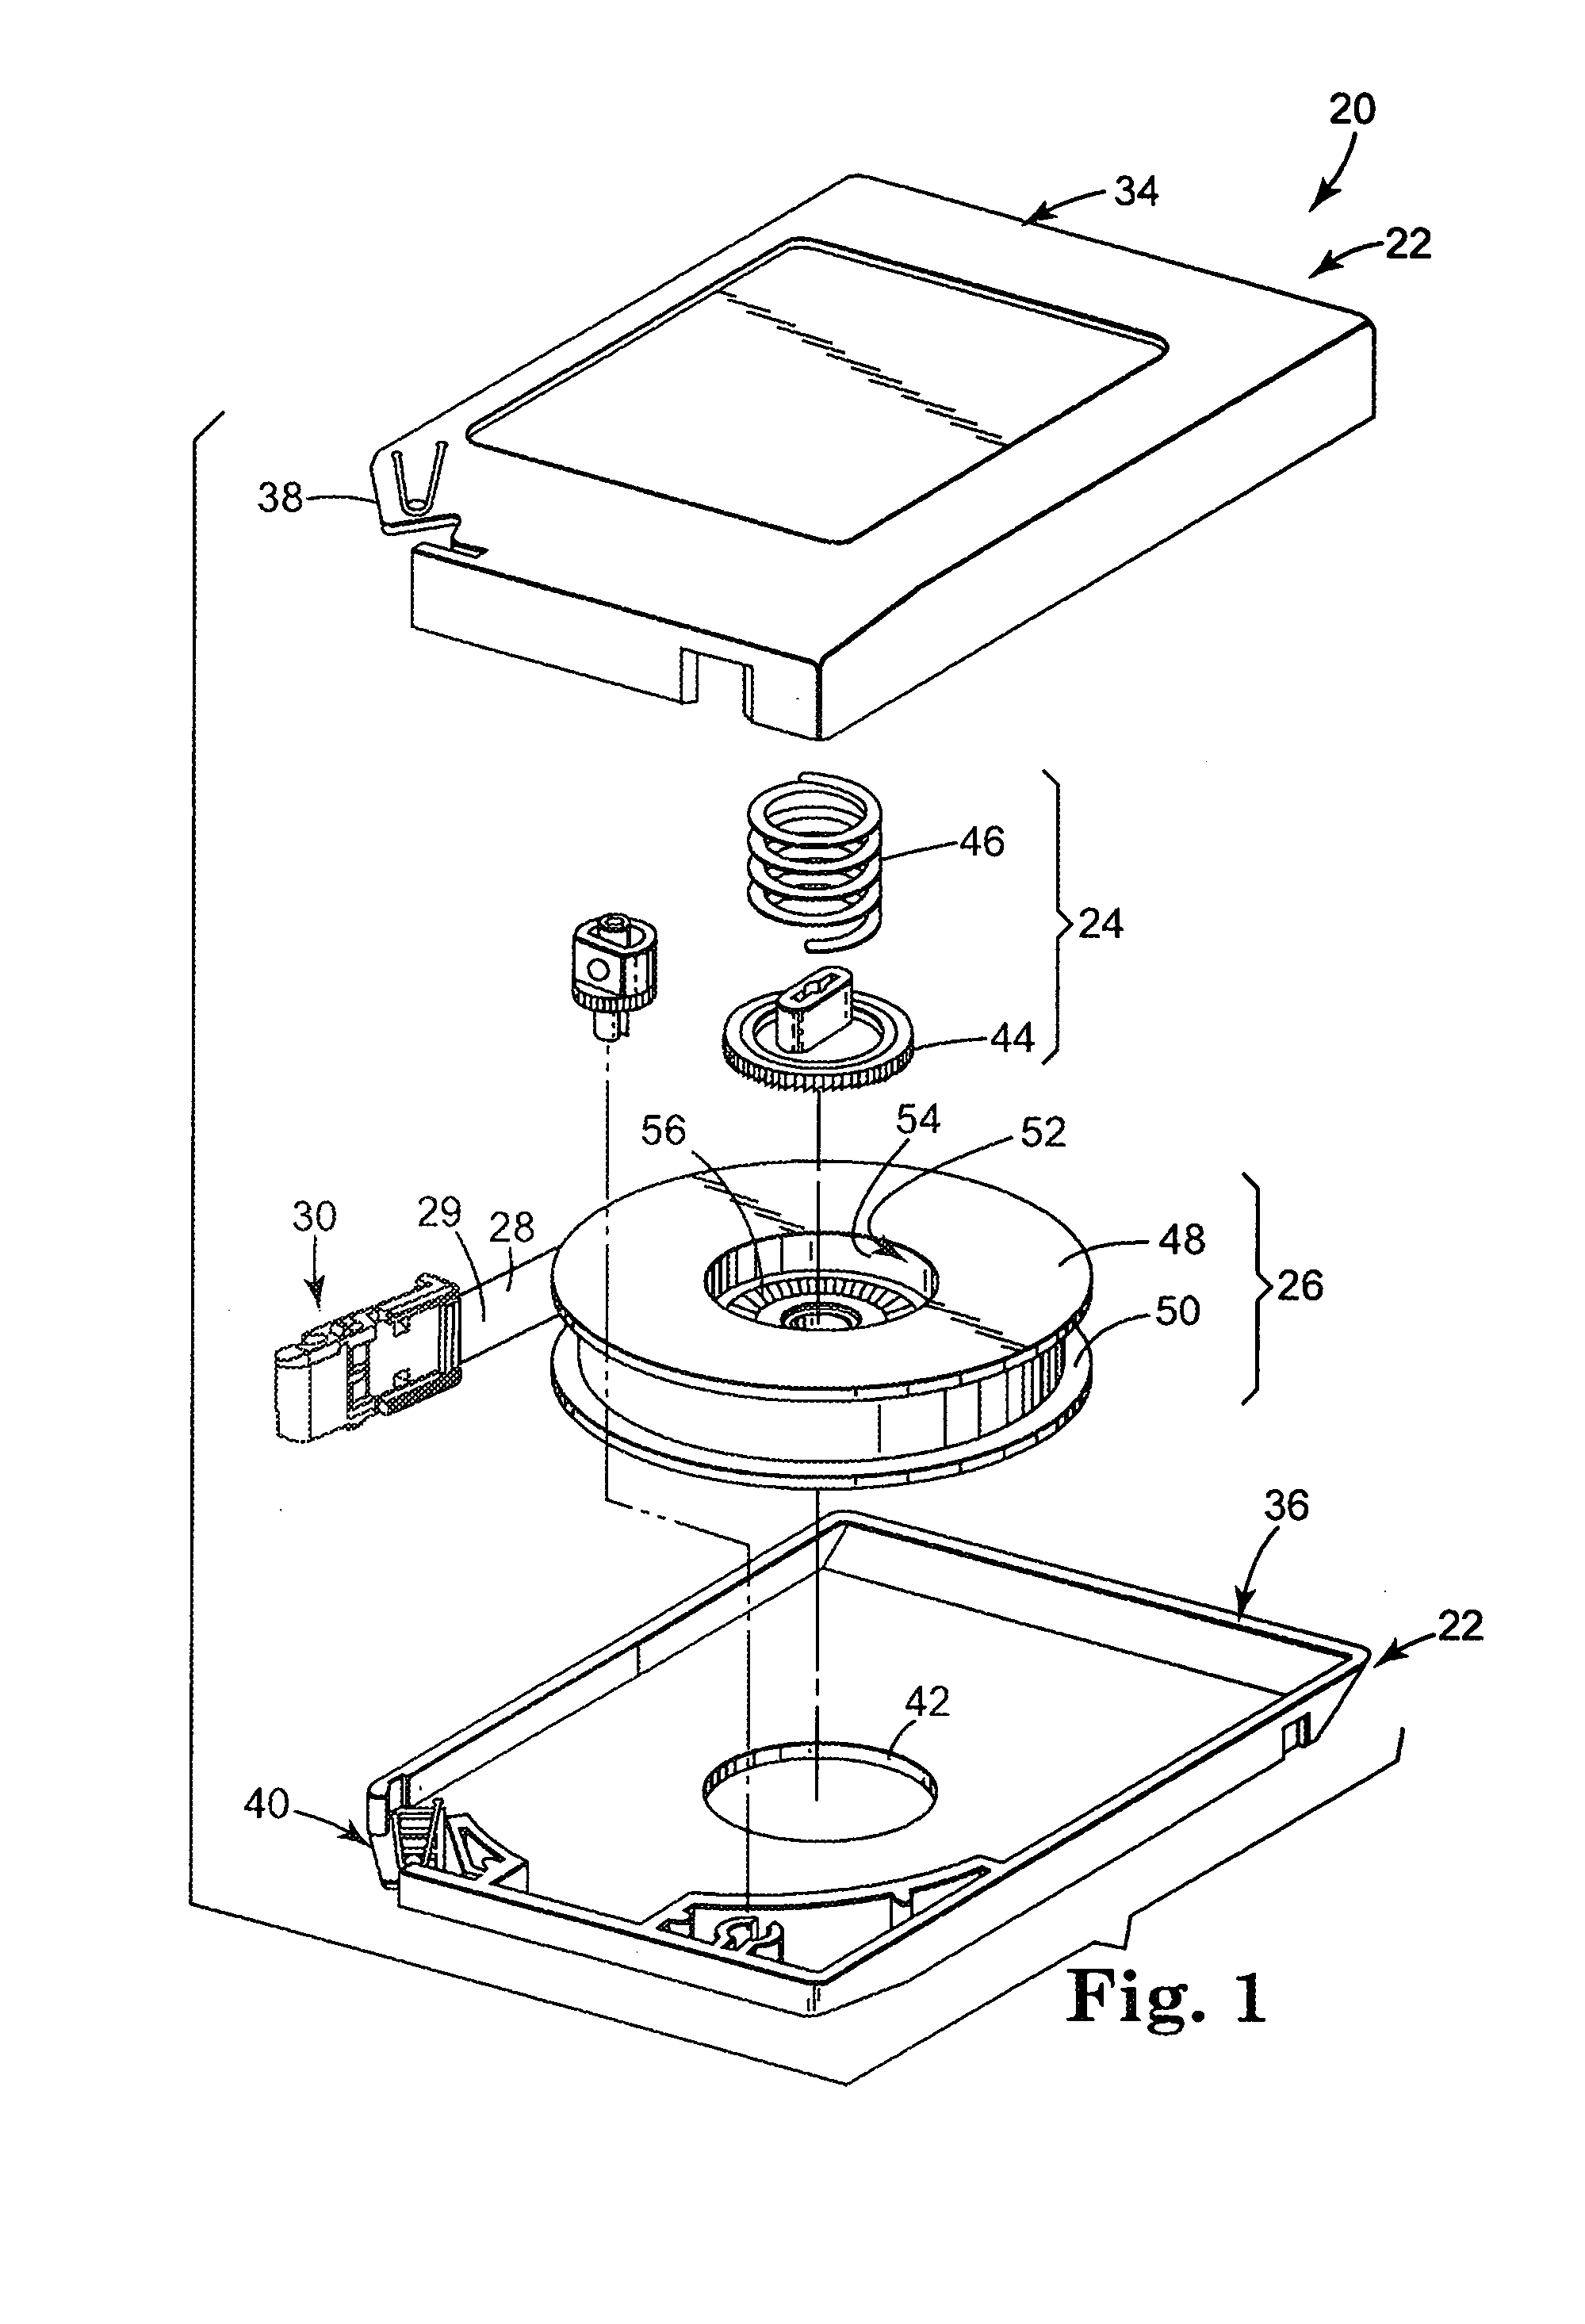 Tape reel assembly with stiff winding surface for a tape drive system